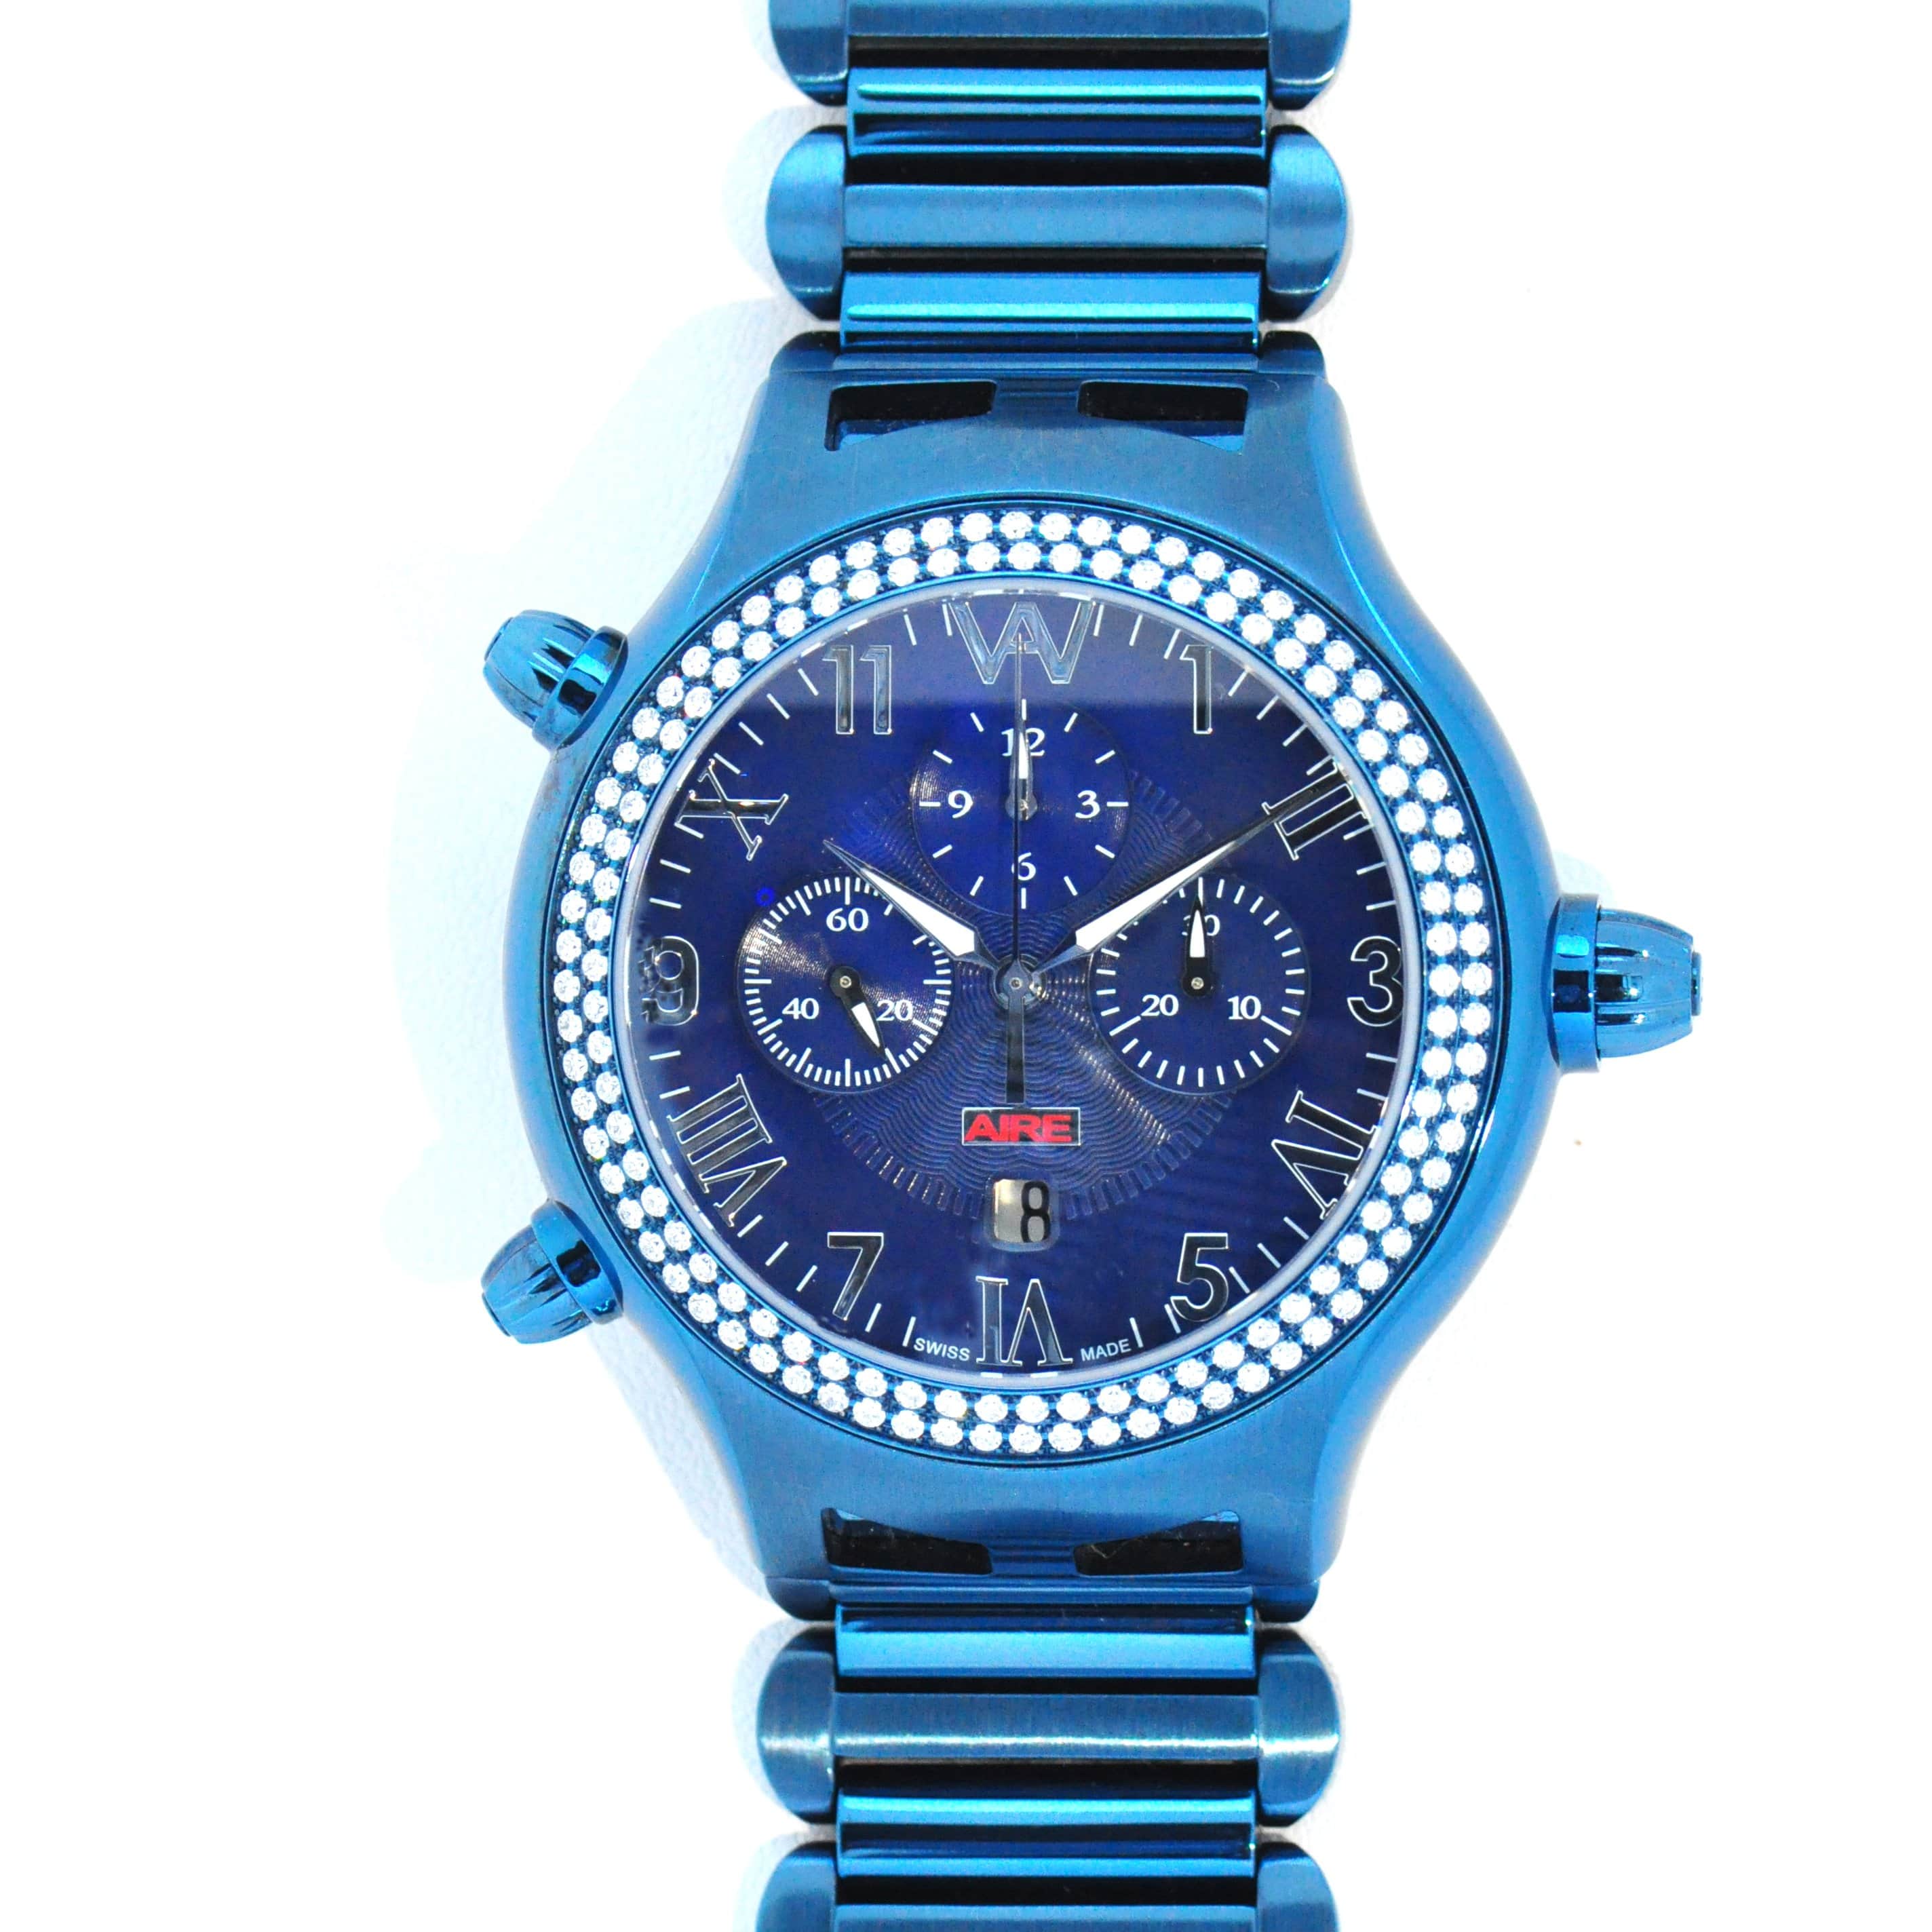 CHRIS AIRE WATCH - PARLAY BLUE LAGOON - Chris Aire Fine Jewelry & Timepieces